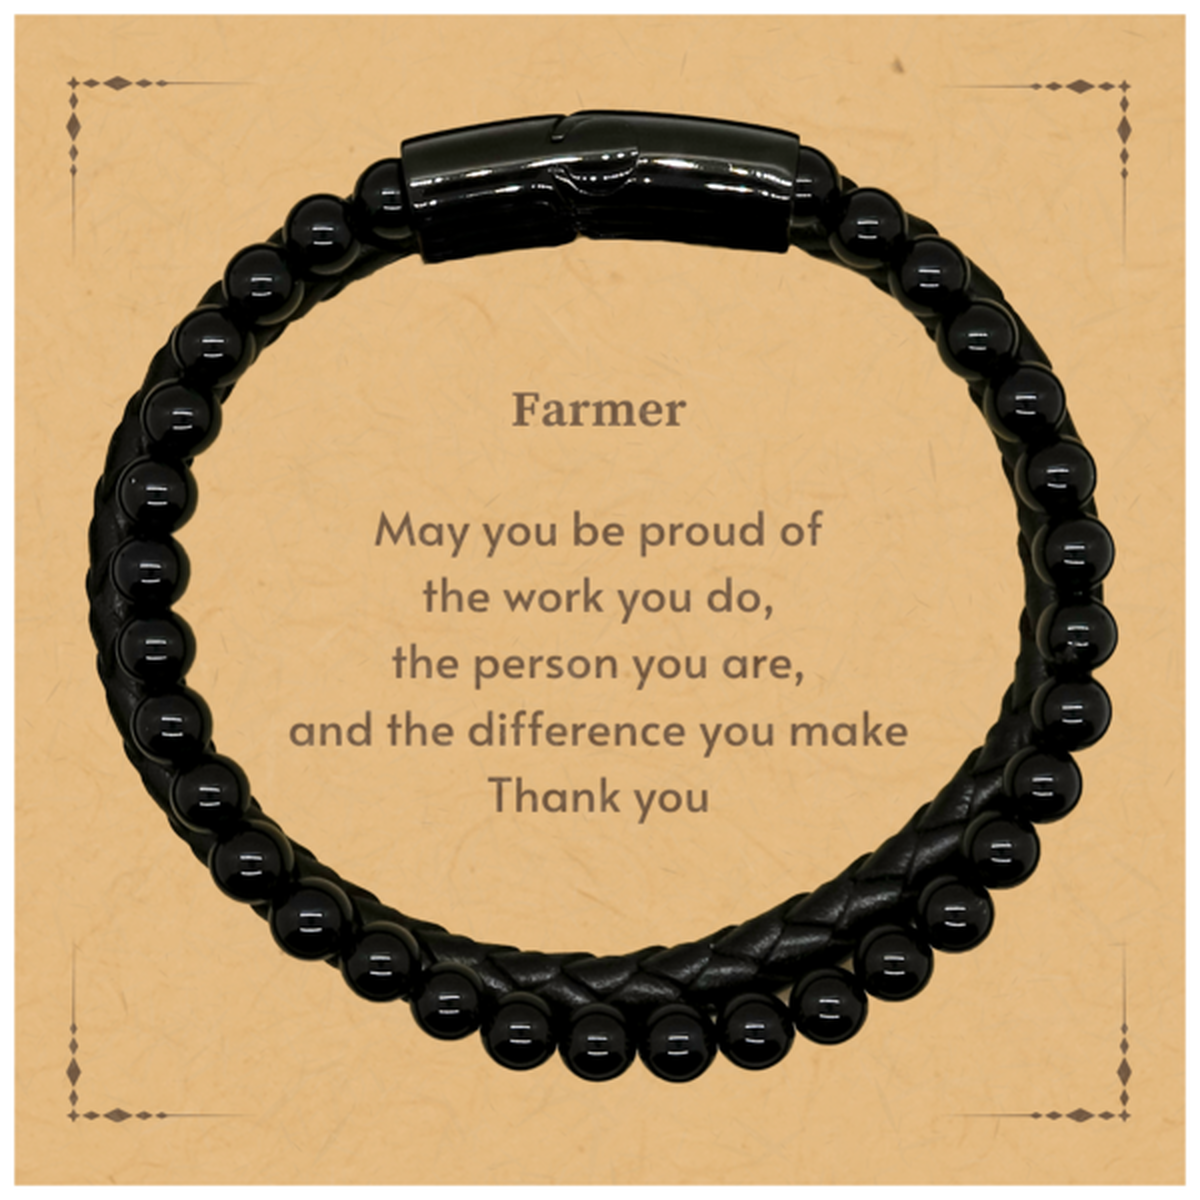 Heartwarming Stone Leather Bracelets Retirement Coworkers Gifts for Farmer, Farmer May You be proud of the work you do, the person you are Gifts for Boss Men Women Friends